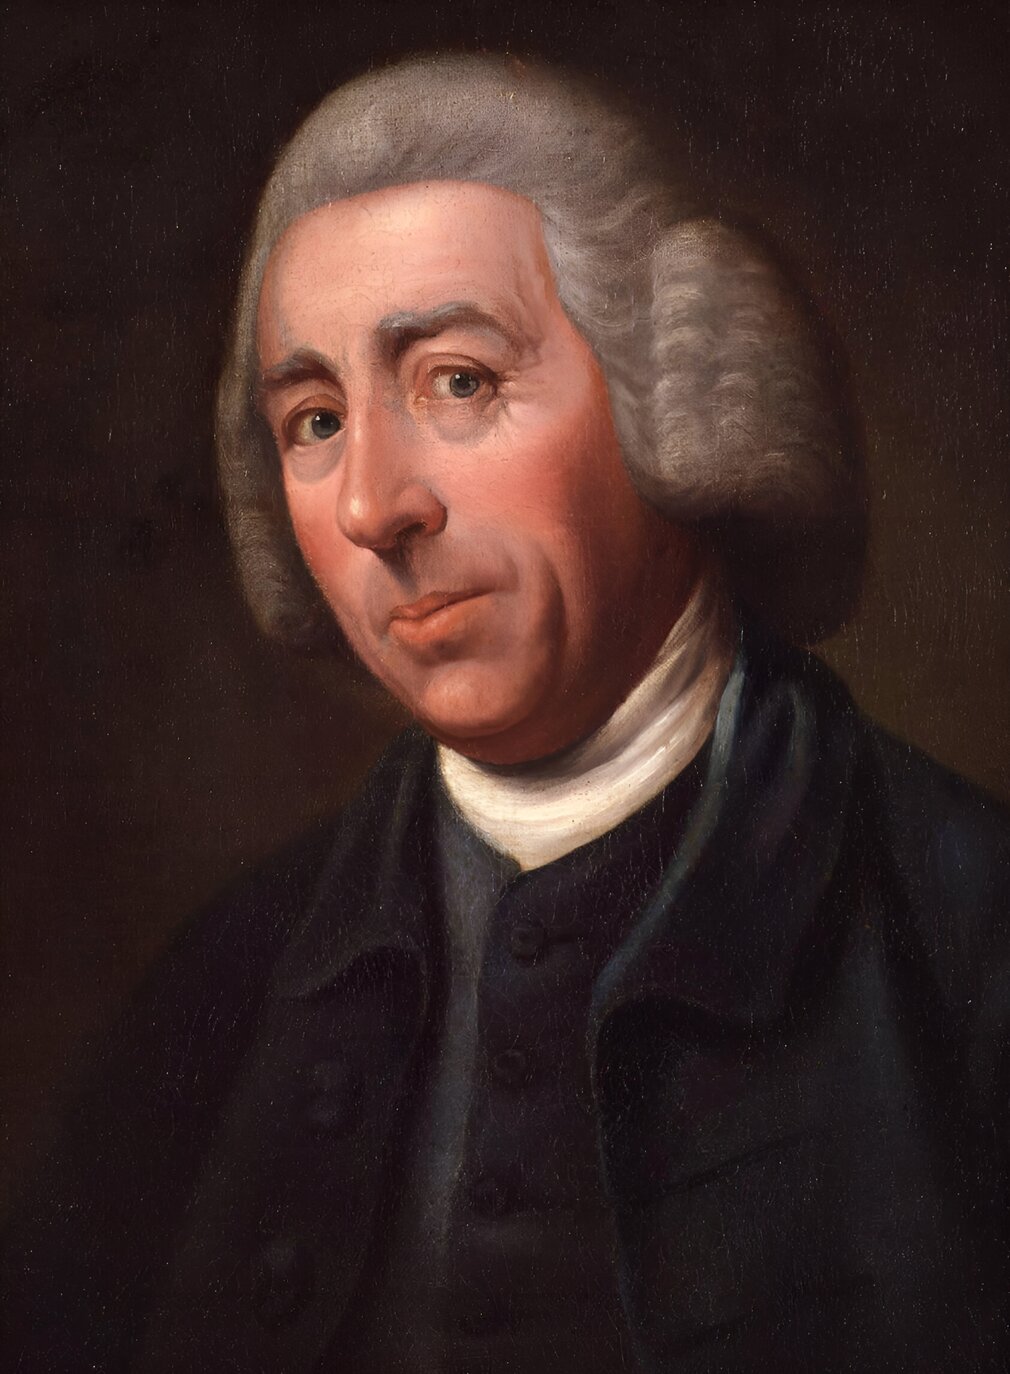 Lancelot 'Capability' Brown, by Nathaniel Dance